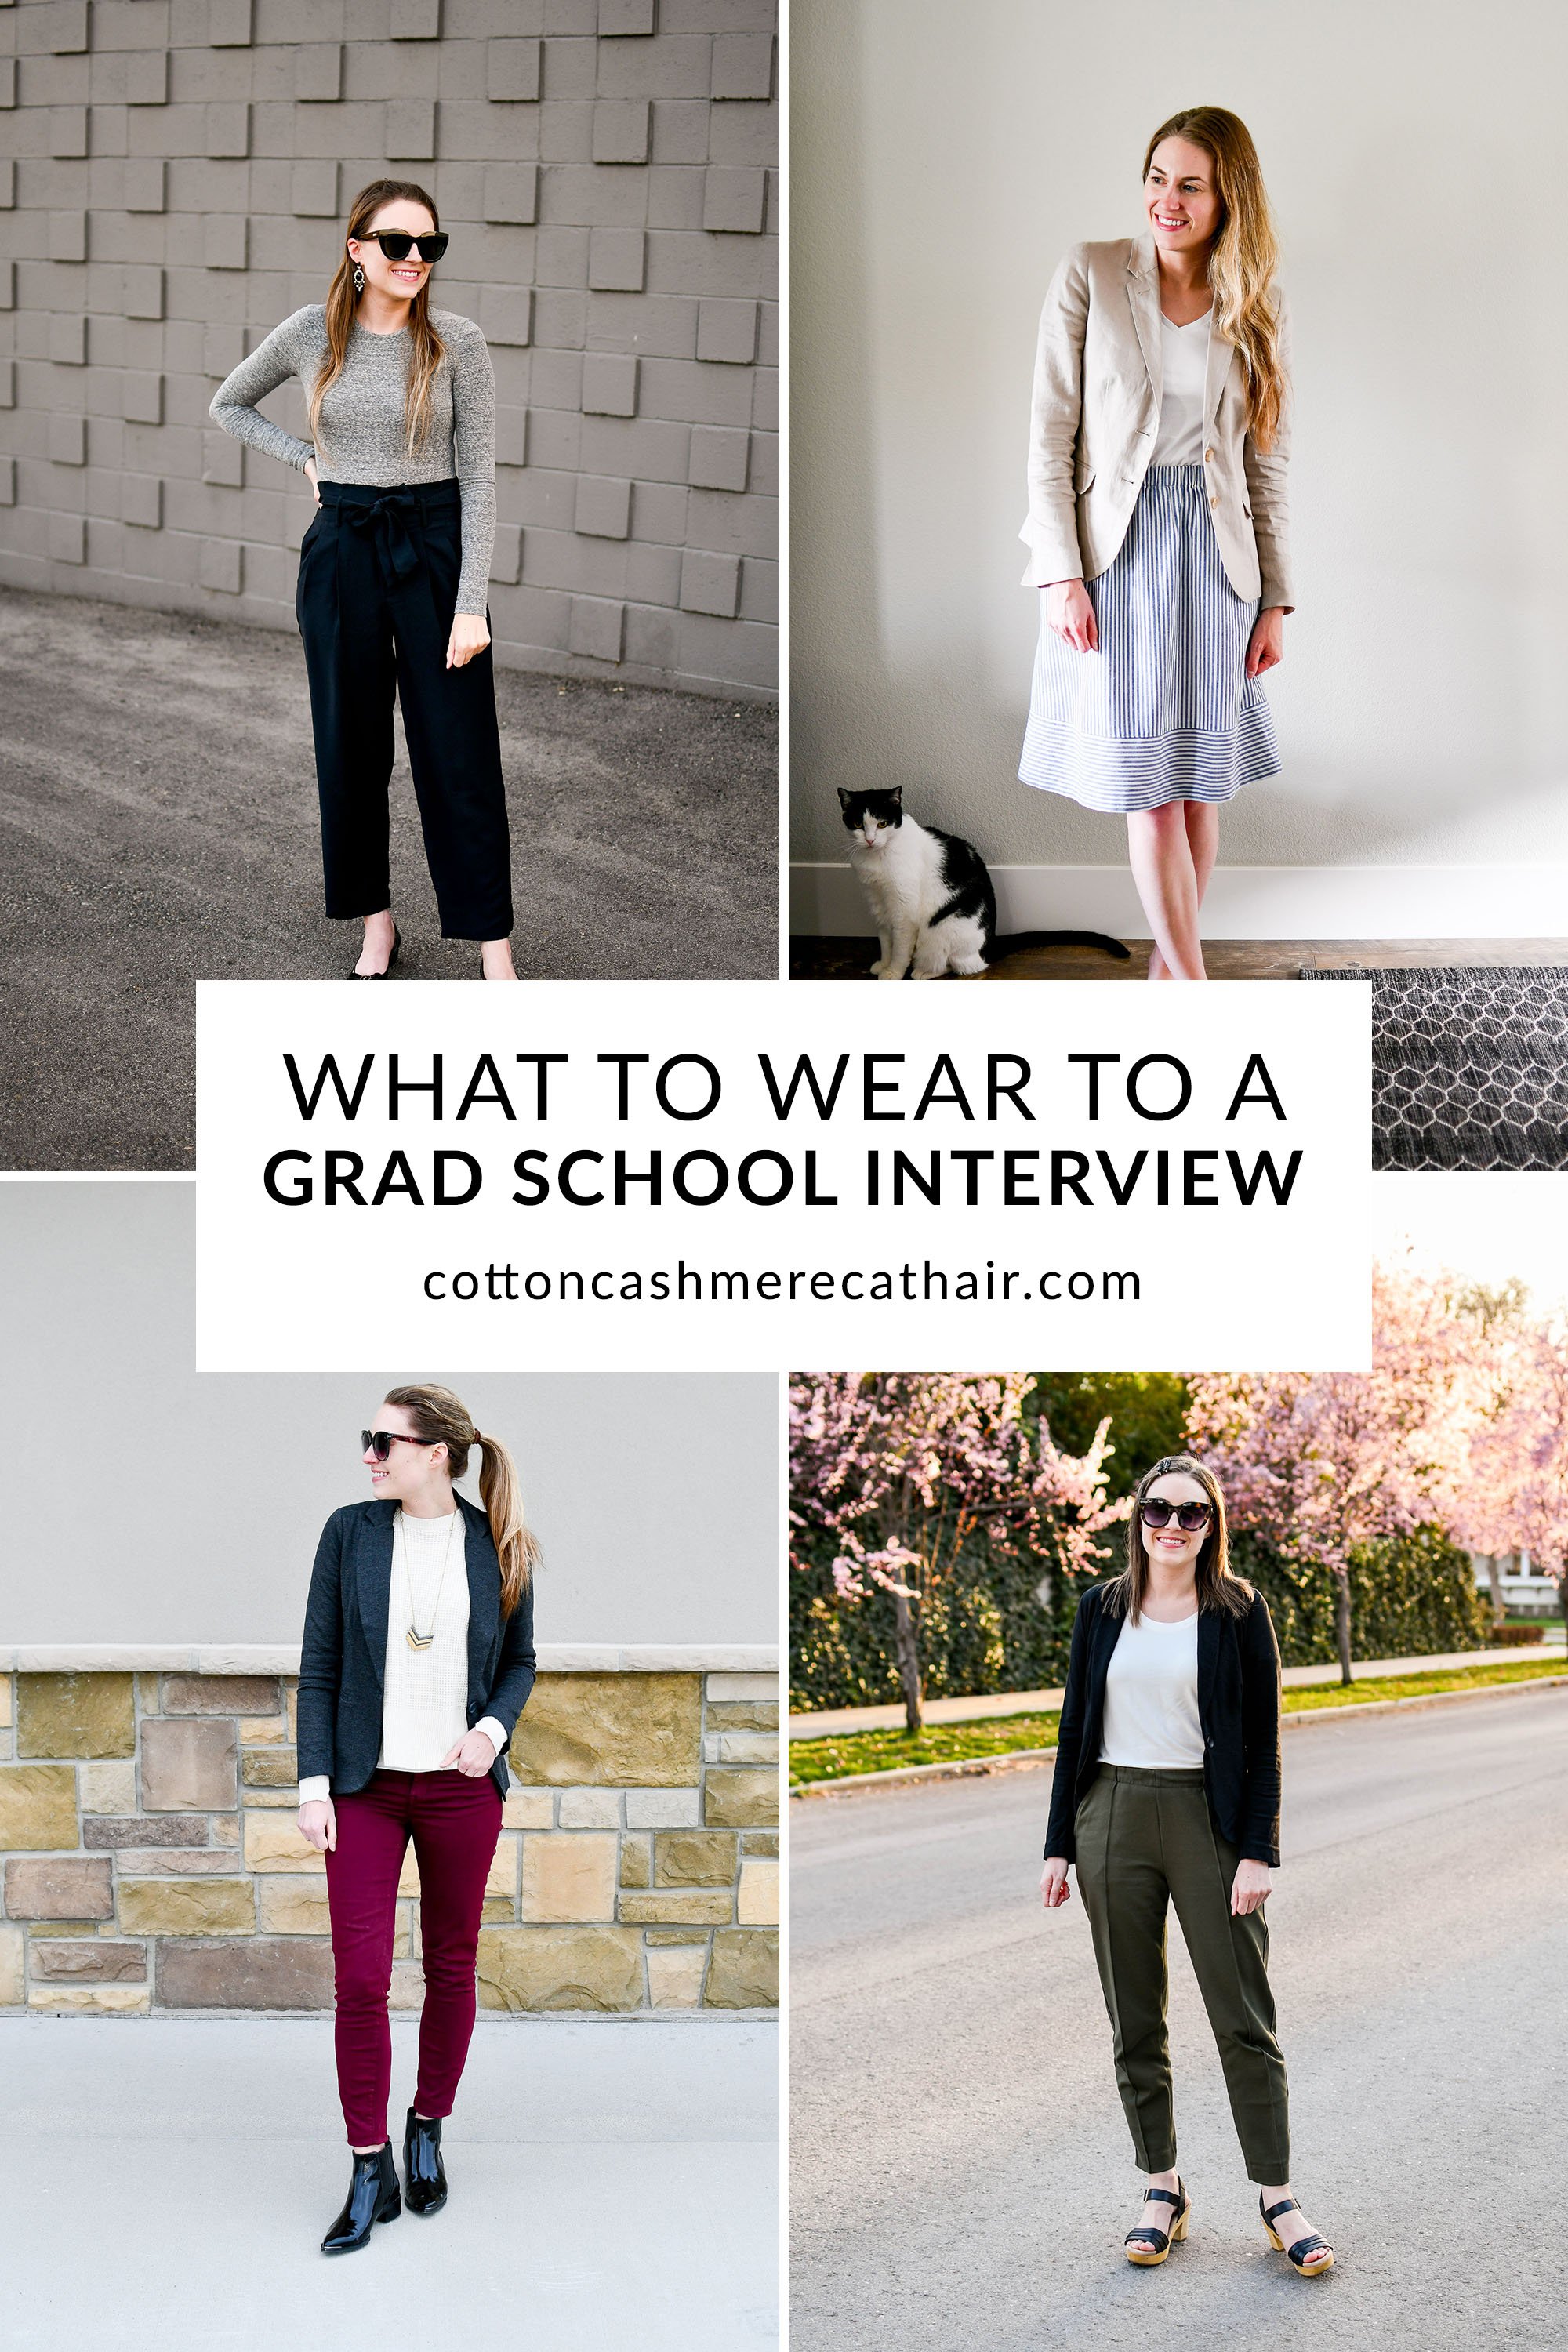 What to Wear to a Grad School Interview | Grad School Interview Outfit Ideas | Cotton Cashmere Cat Hair